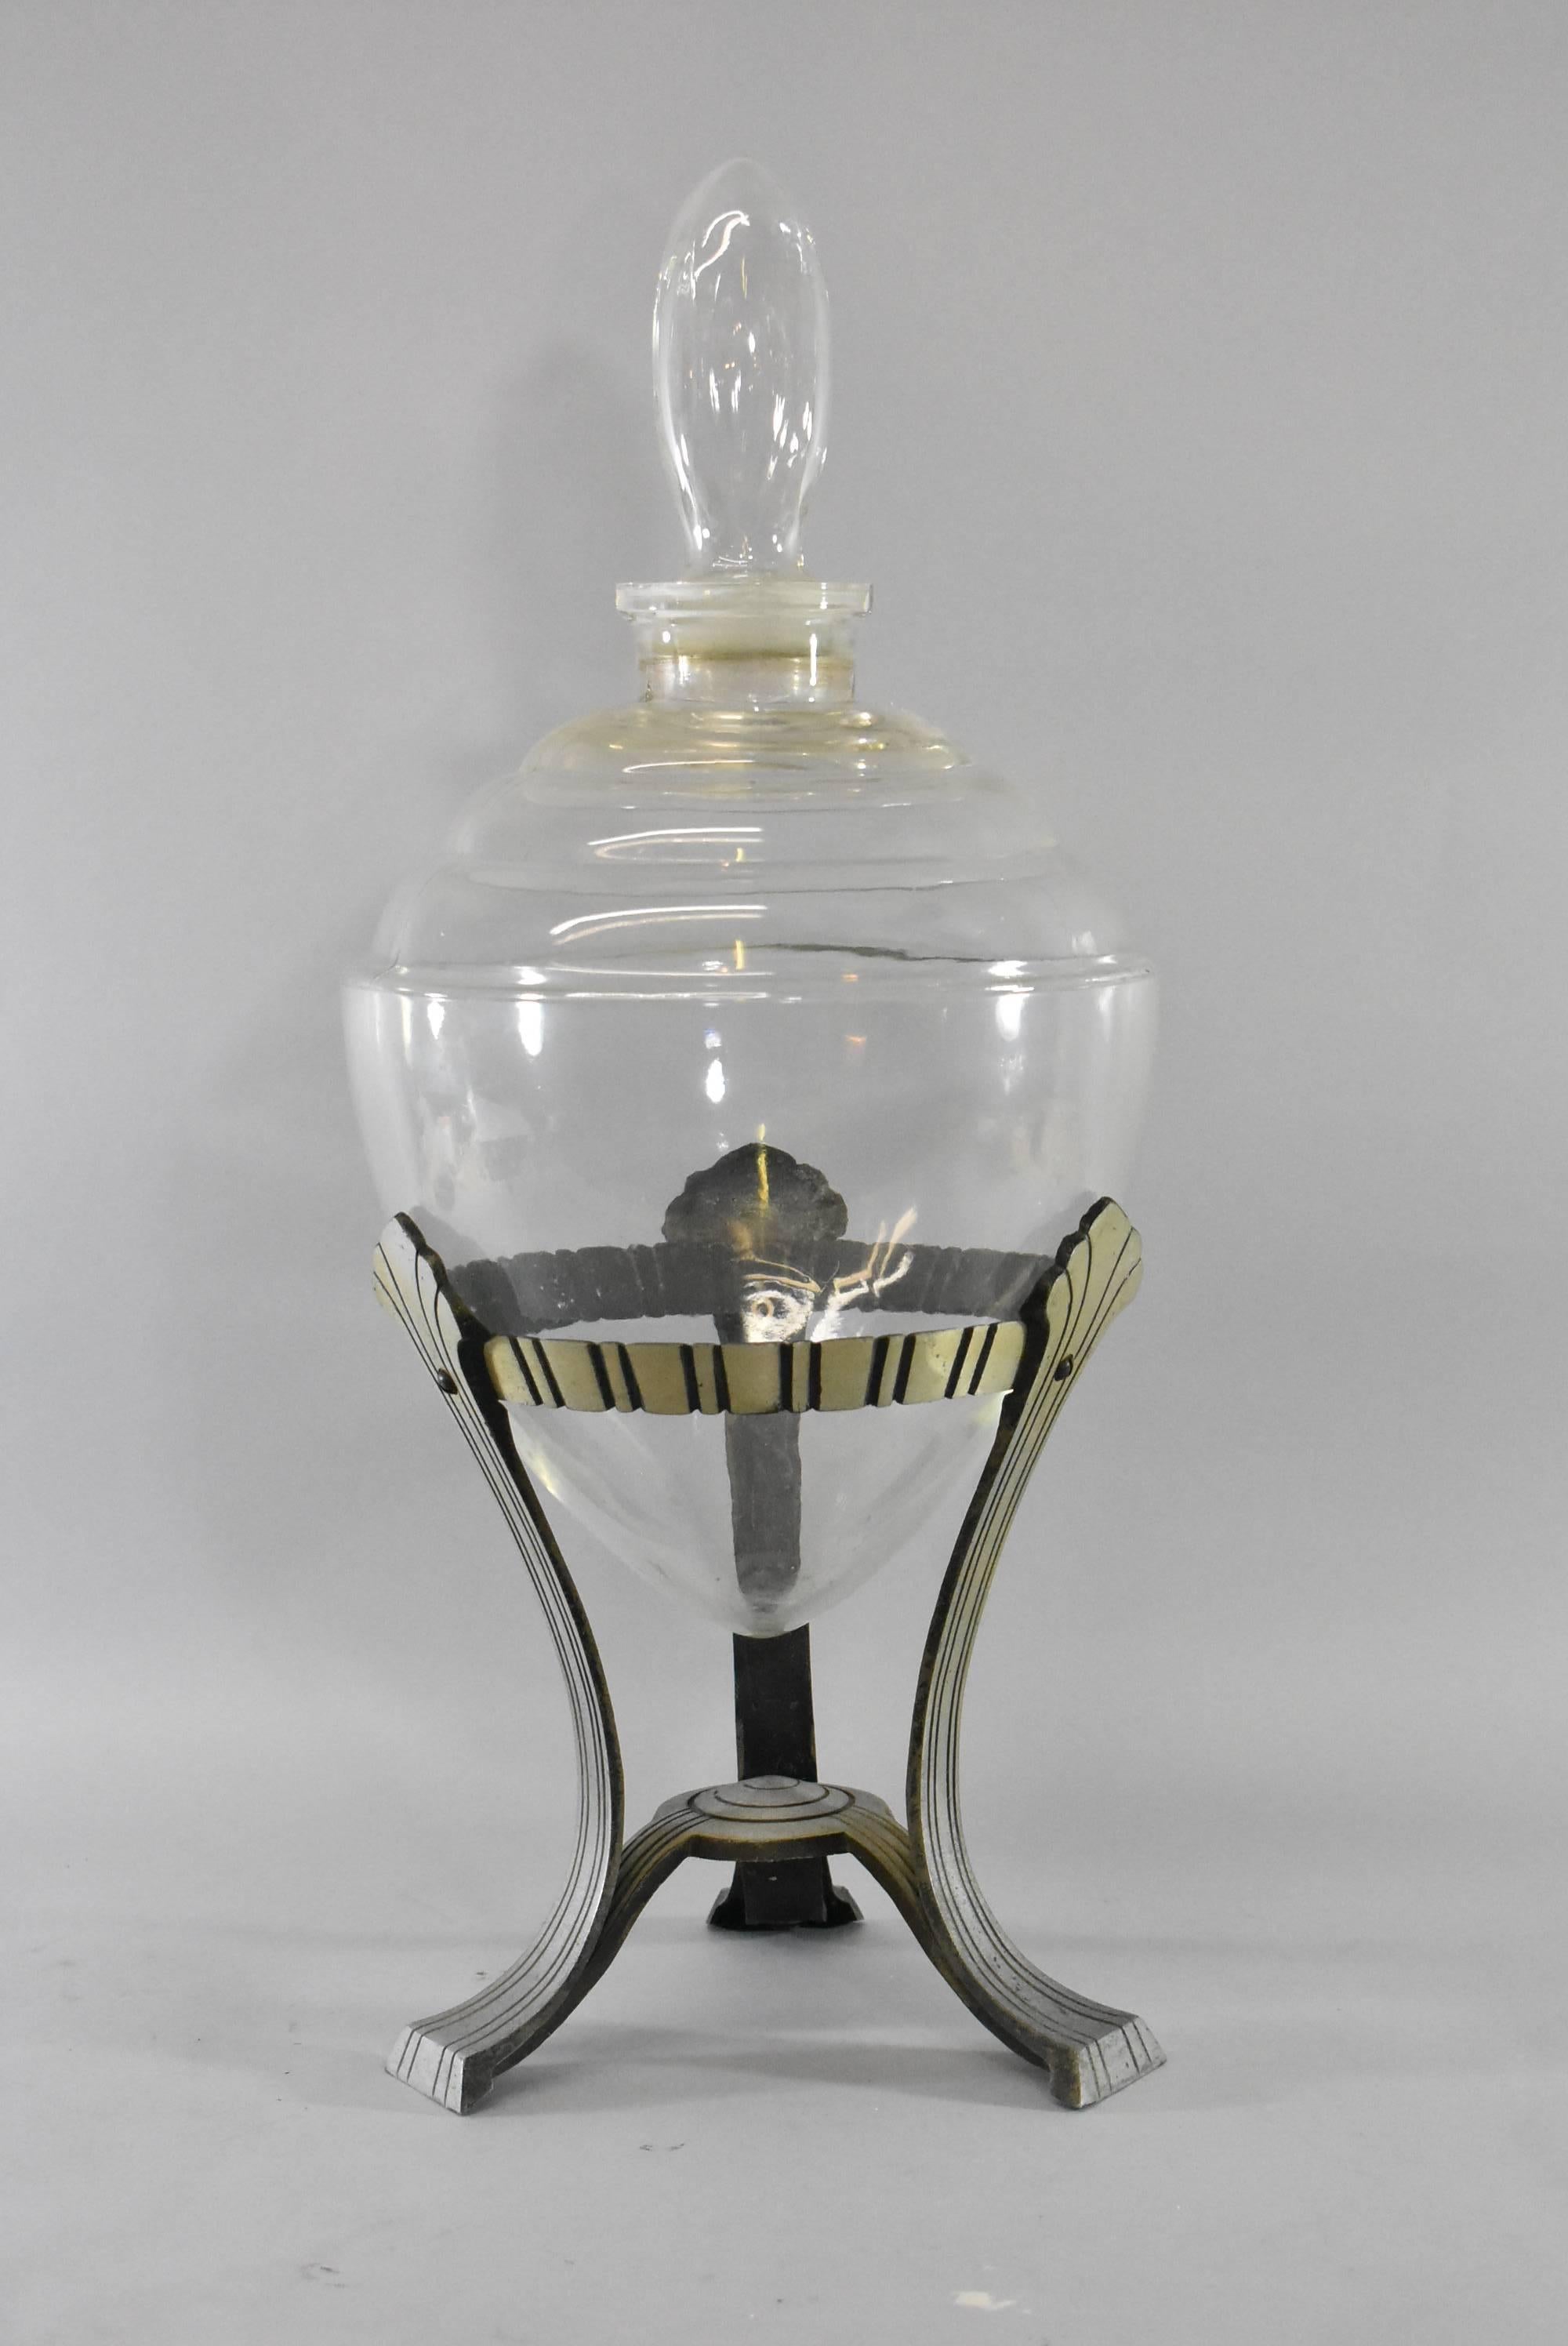 A fantastic Art Deco style apothecary display jar. It features a removable stopper with a three legs aluminum silver tone stand. The dimensions are 23.5